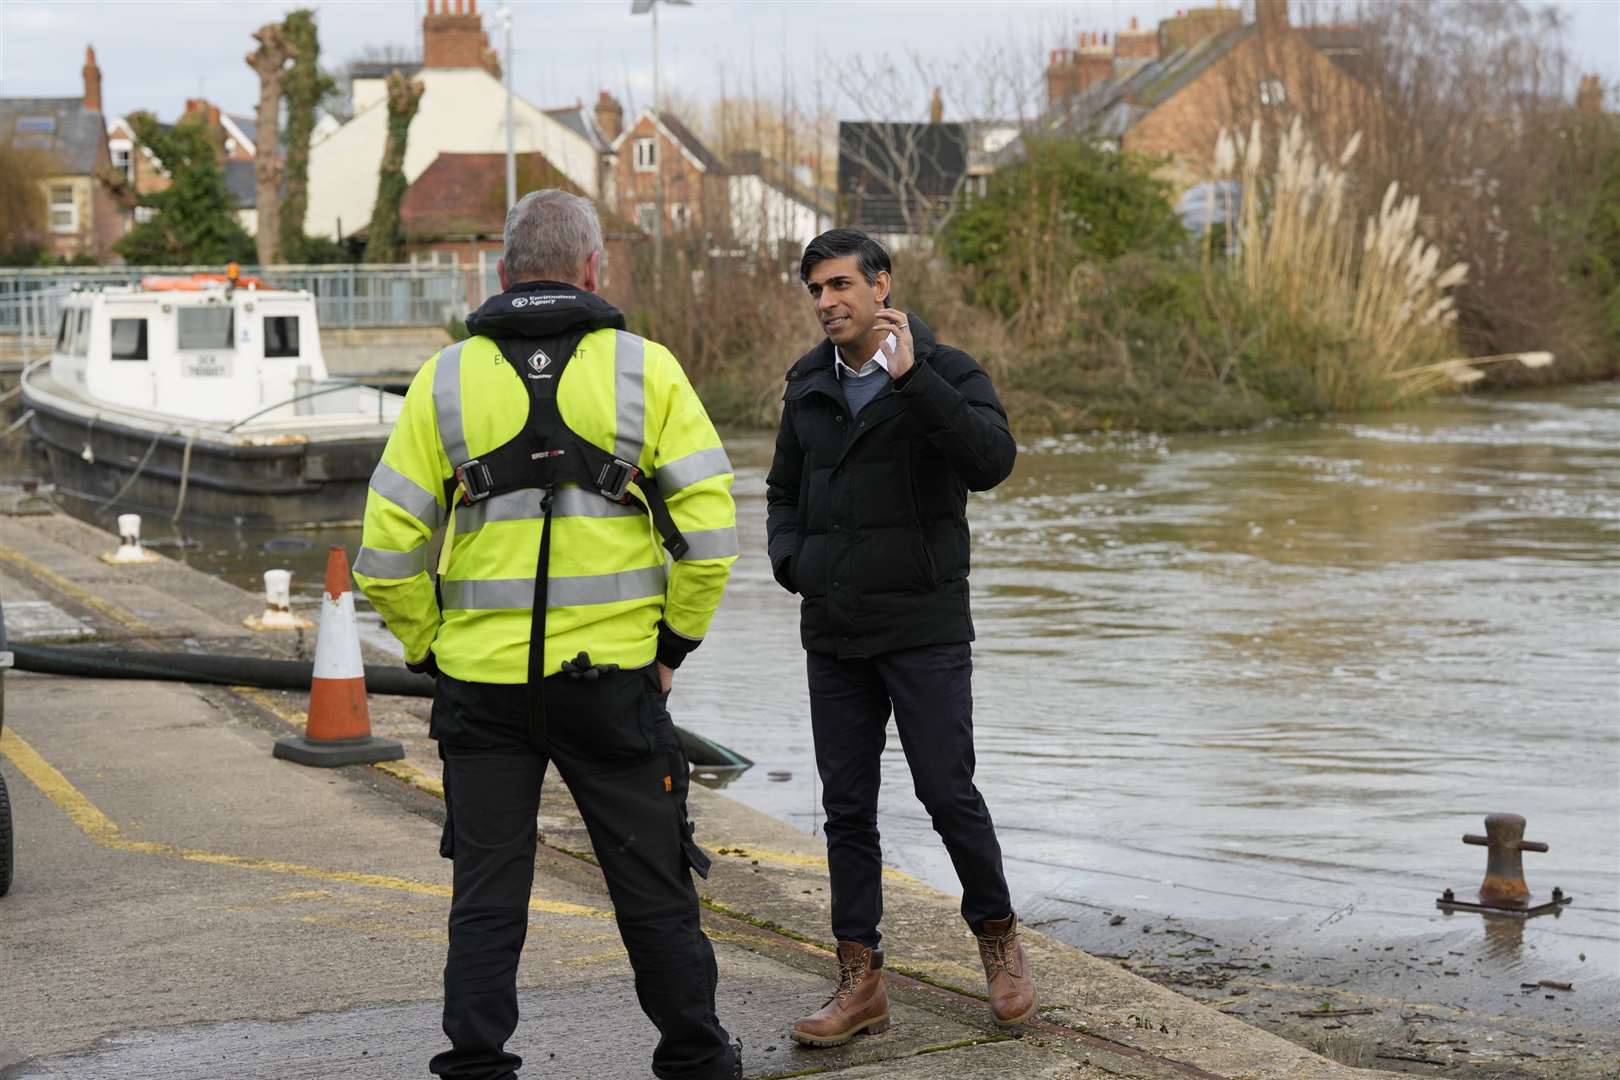 Rishi Sunak speaks to a member of the Environment Agency as he looks at flood defences during a visit to Oxford (Frank Augstein/PA)